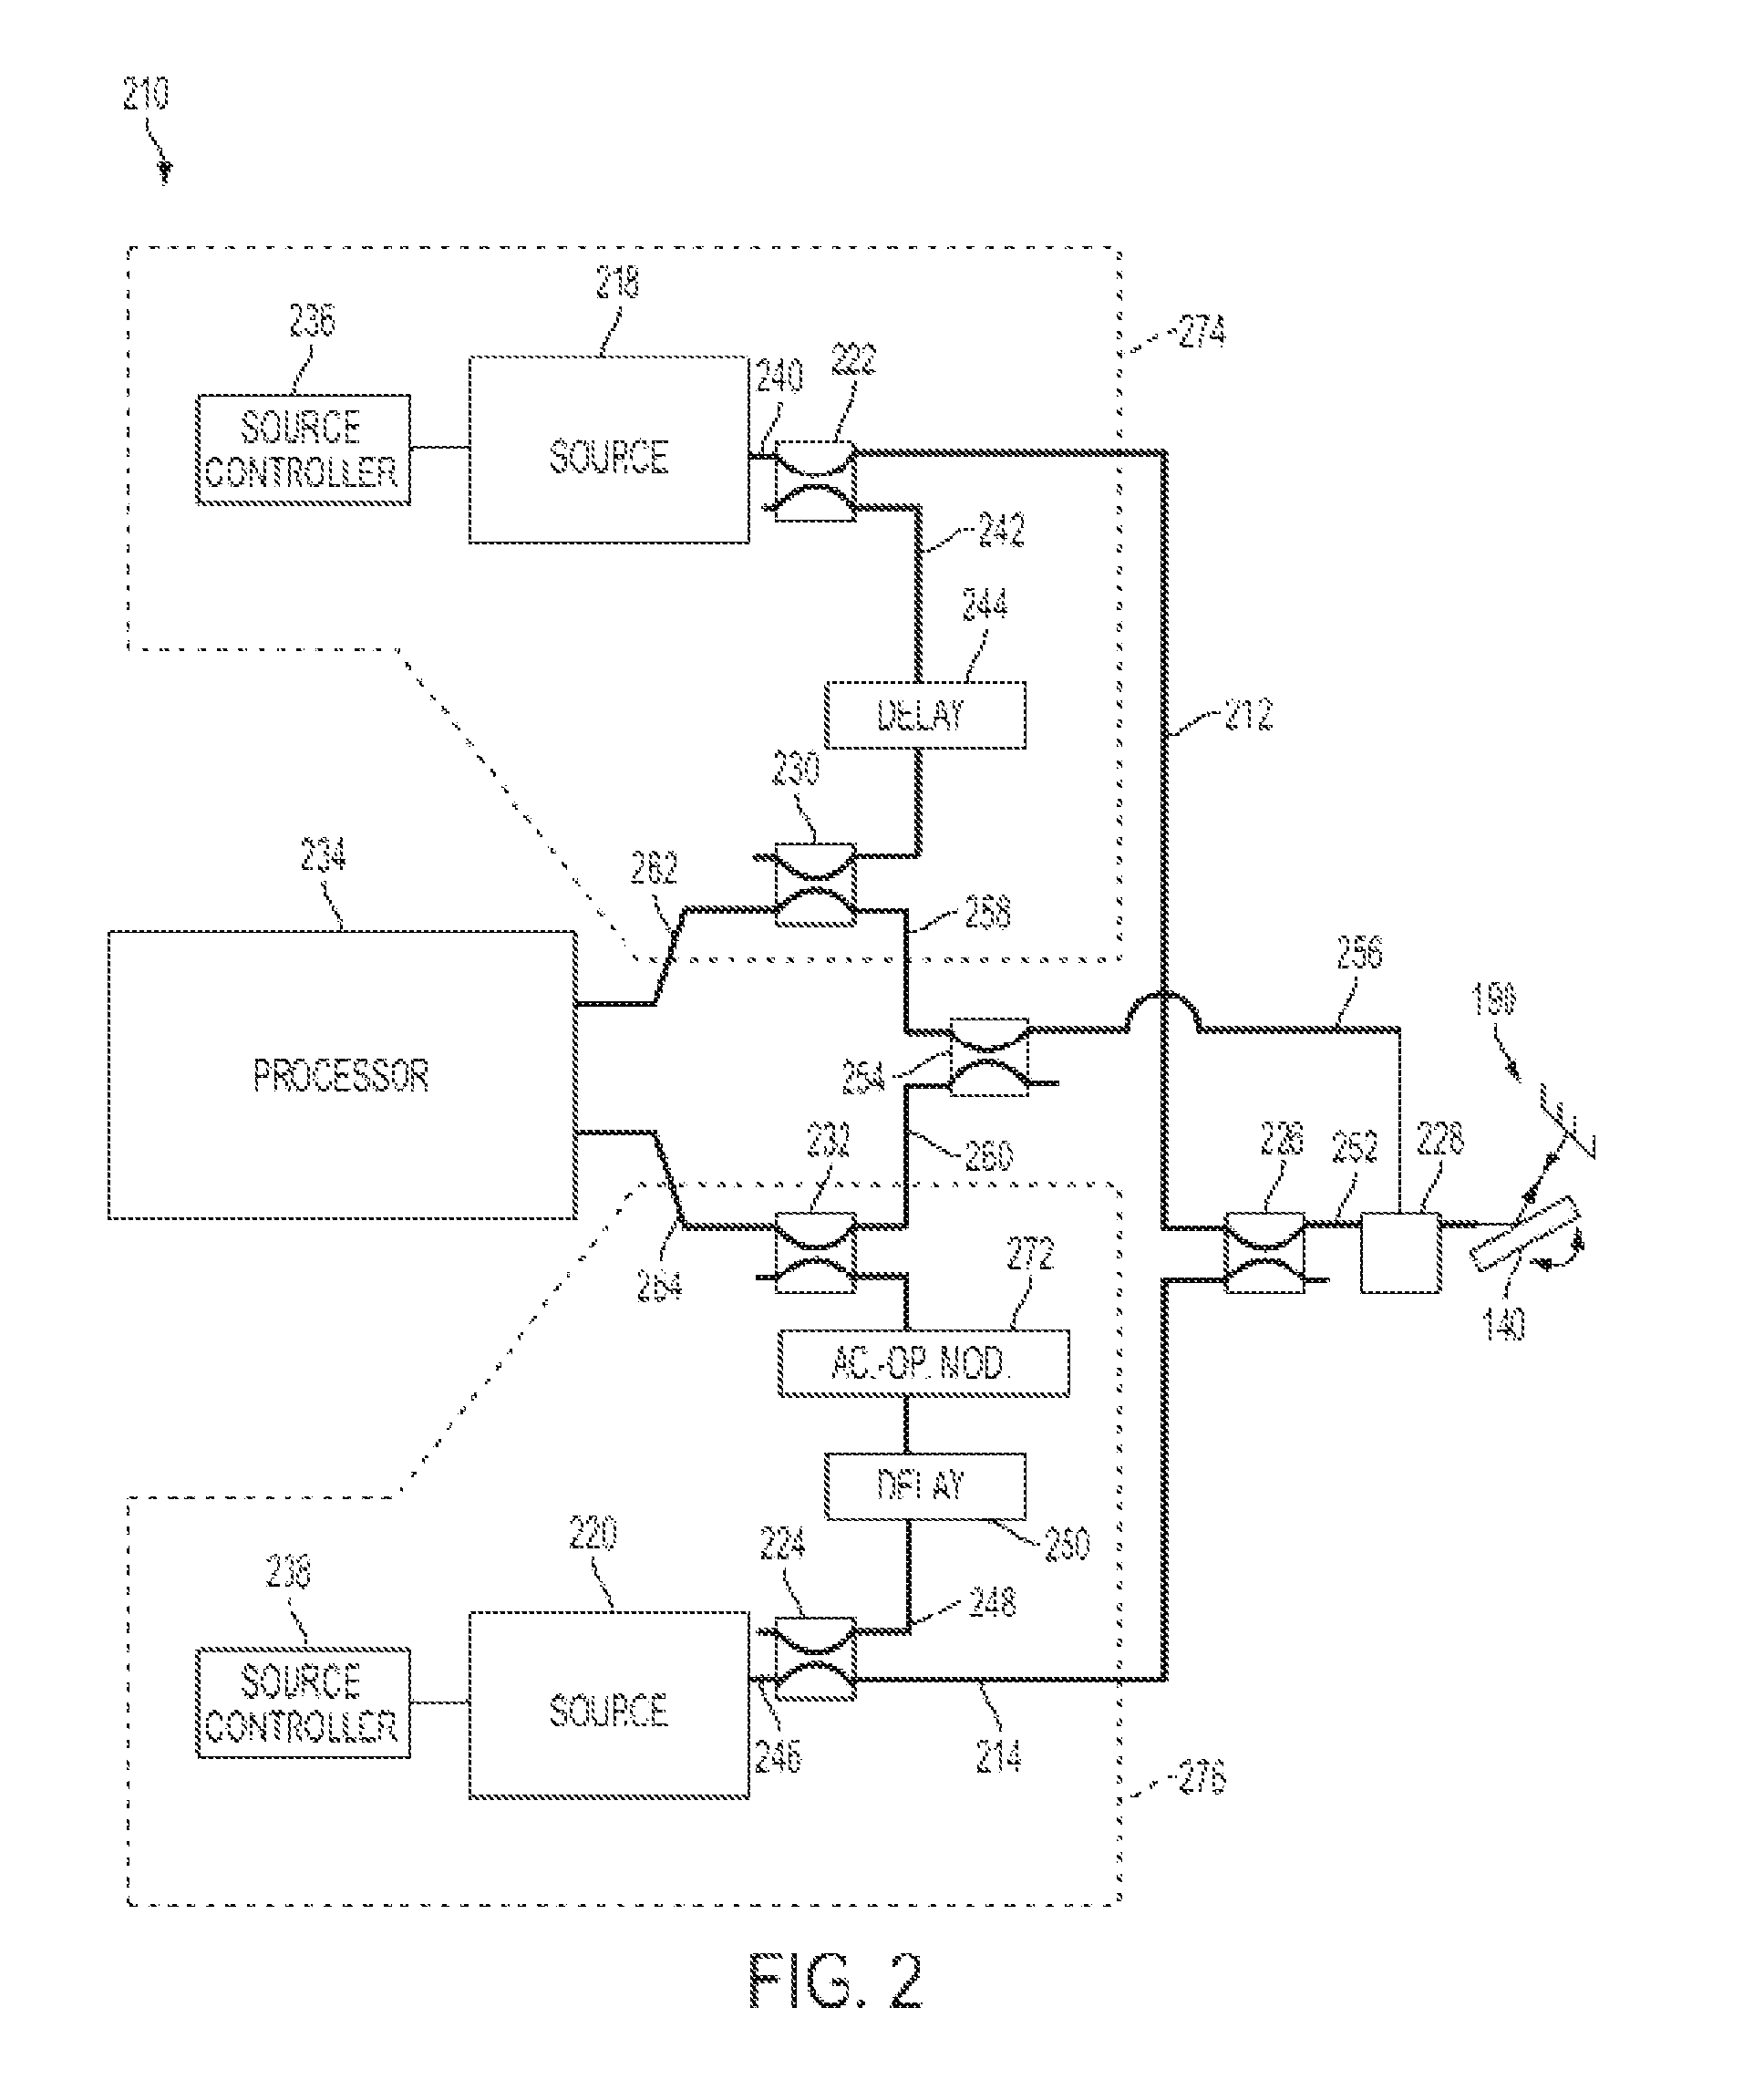 System and Method for Increasing Resolution of Images Obtained from a Three-Dimensional Measurement System